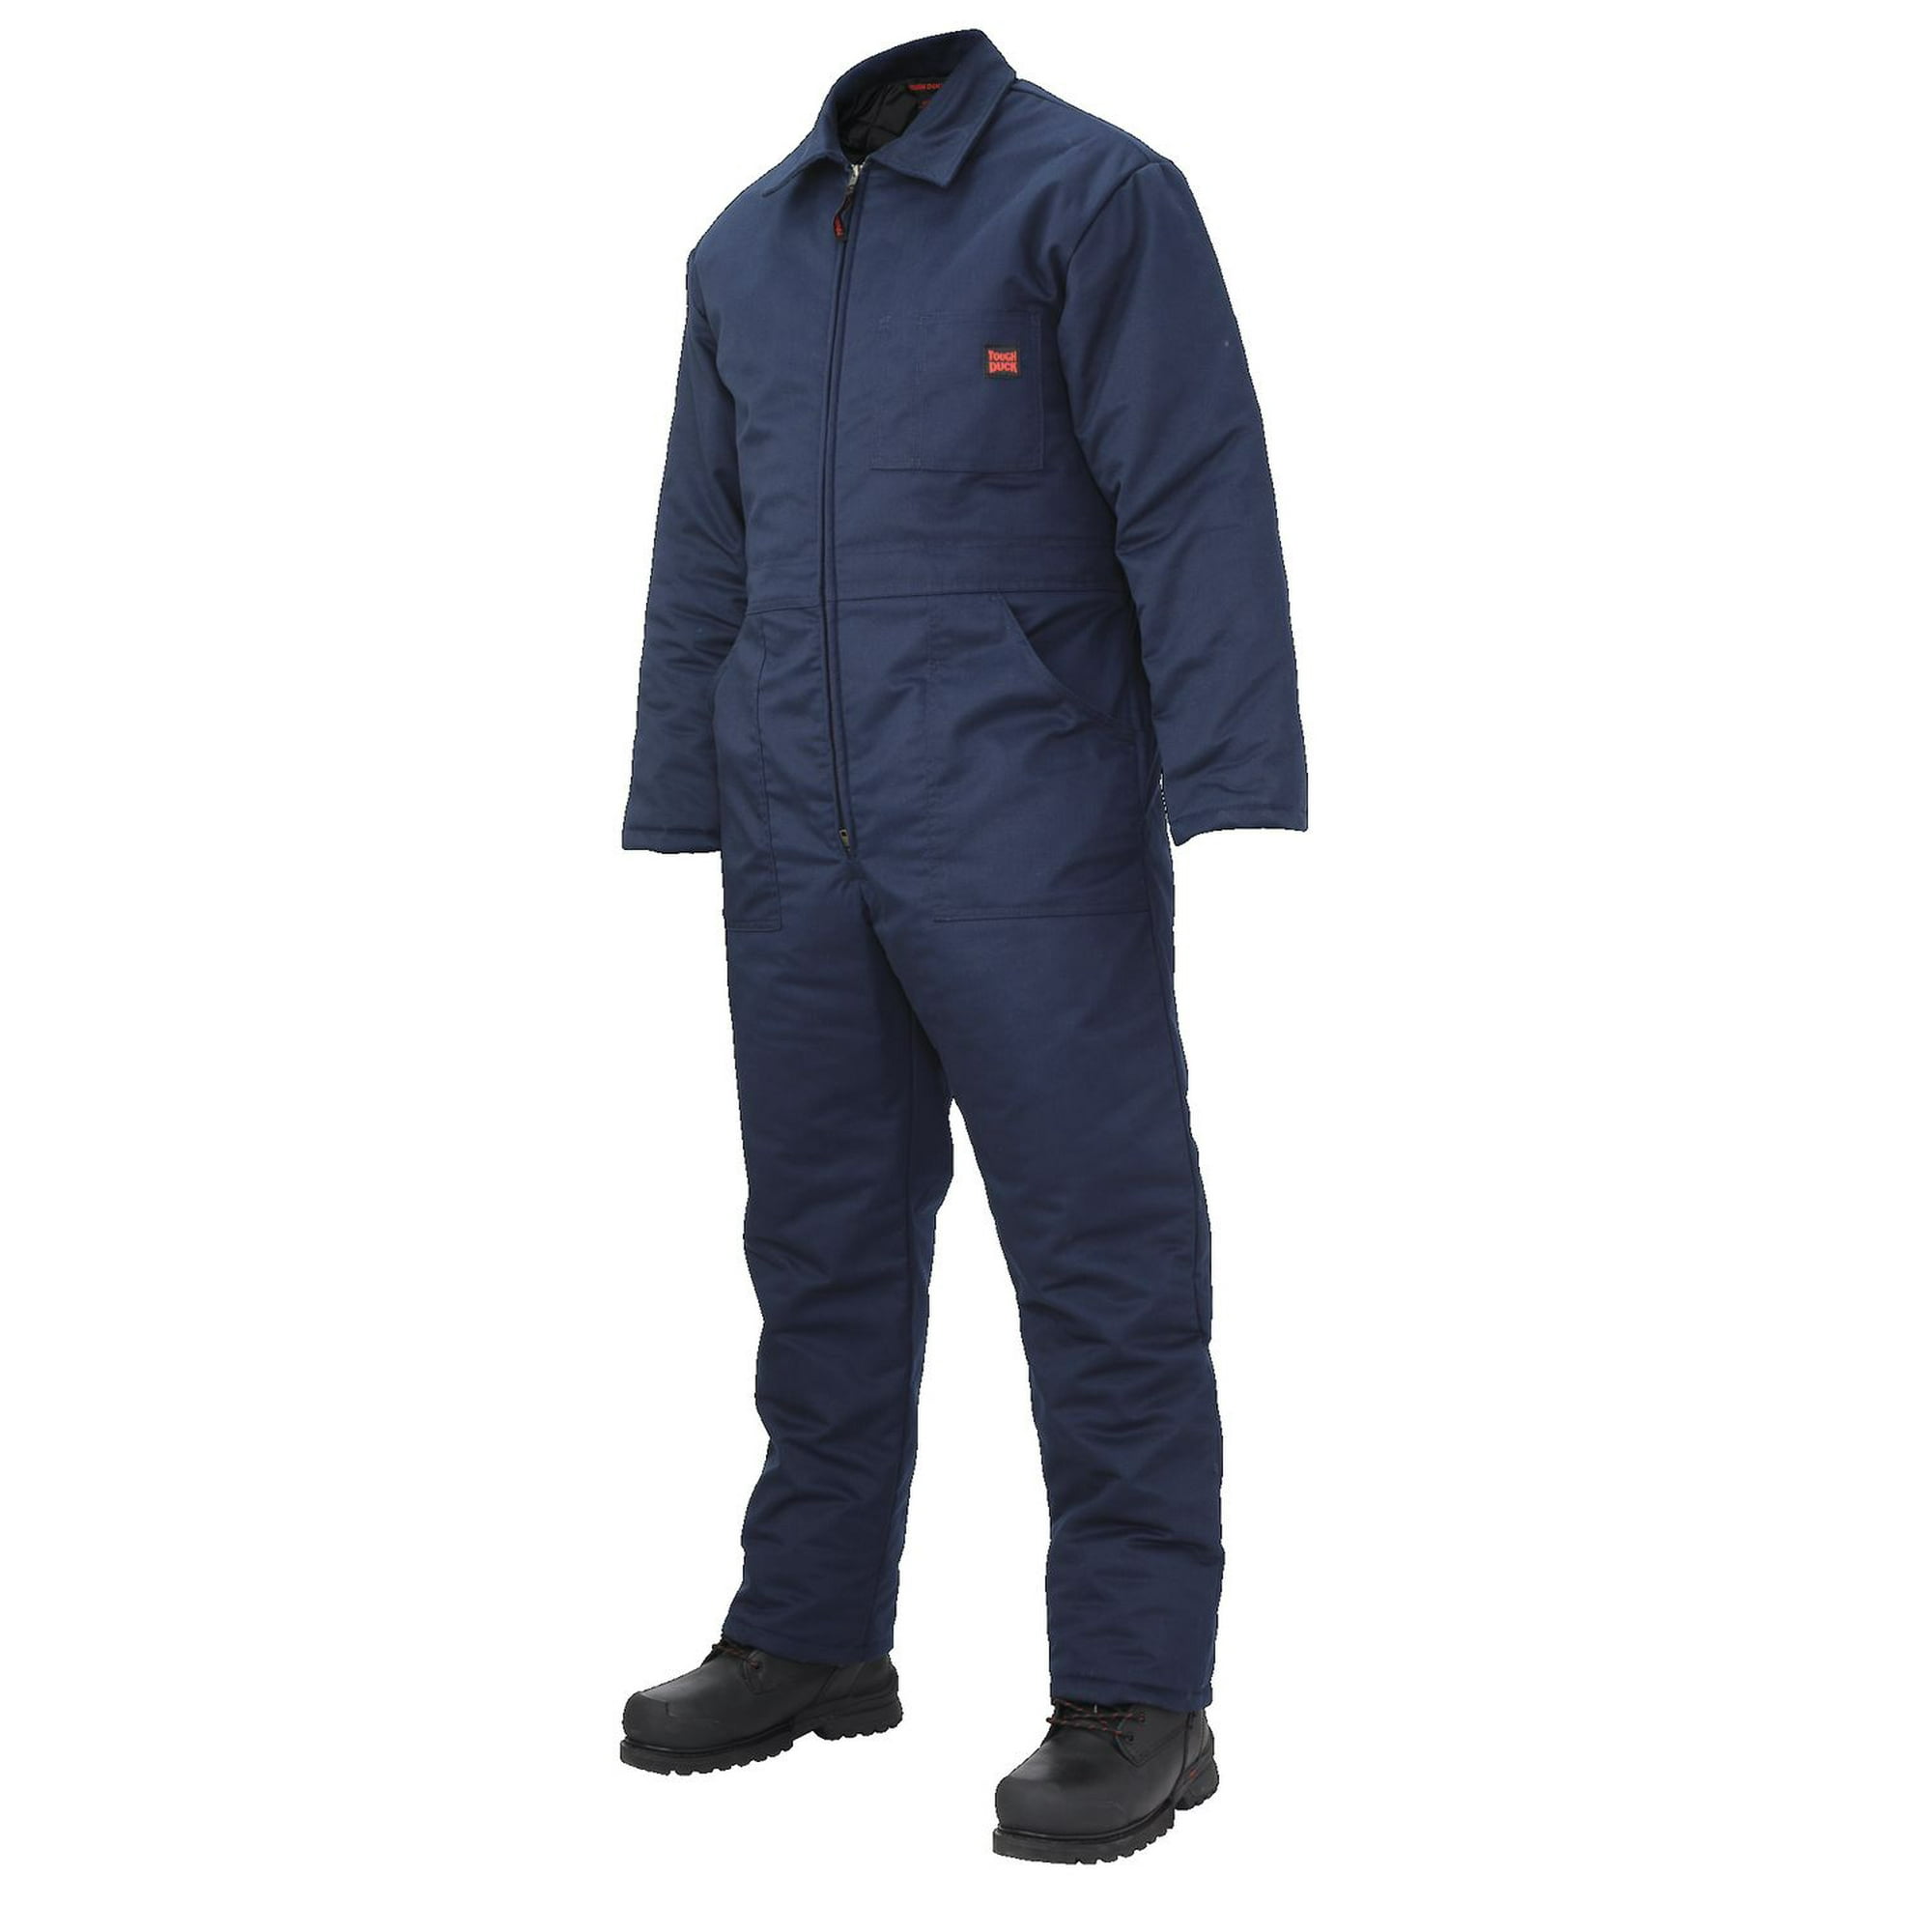 TOUGH DUCK Men's Insulated Coverall 